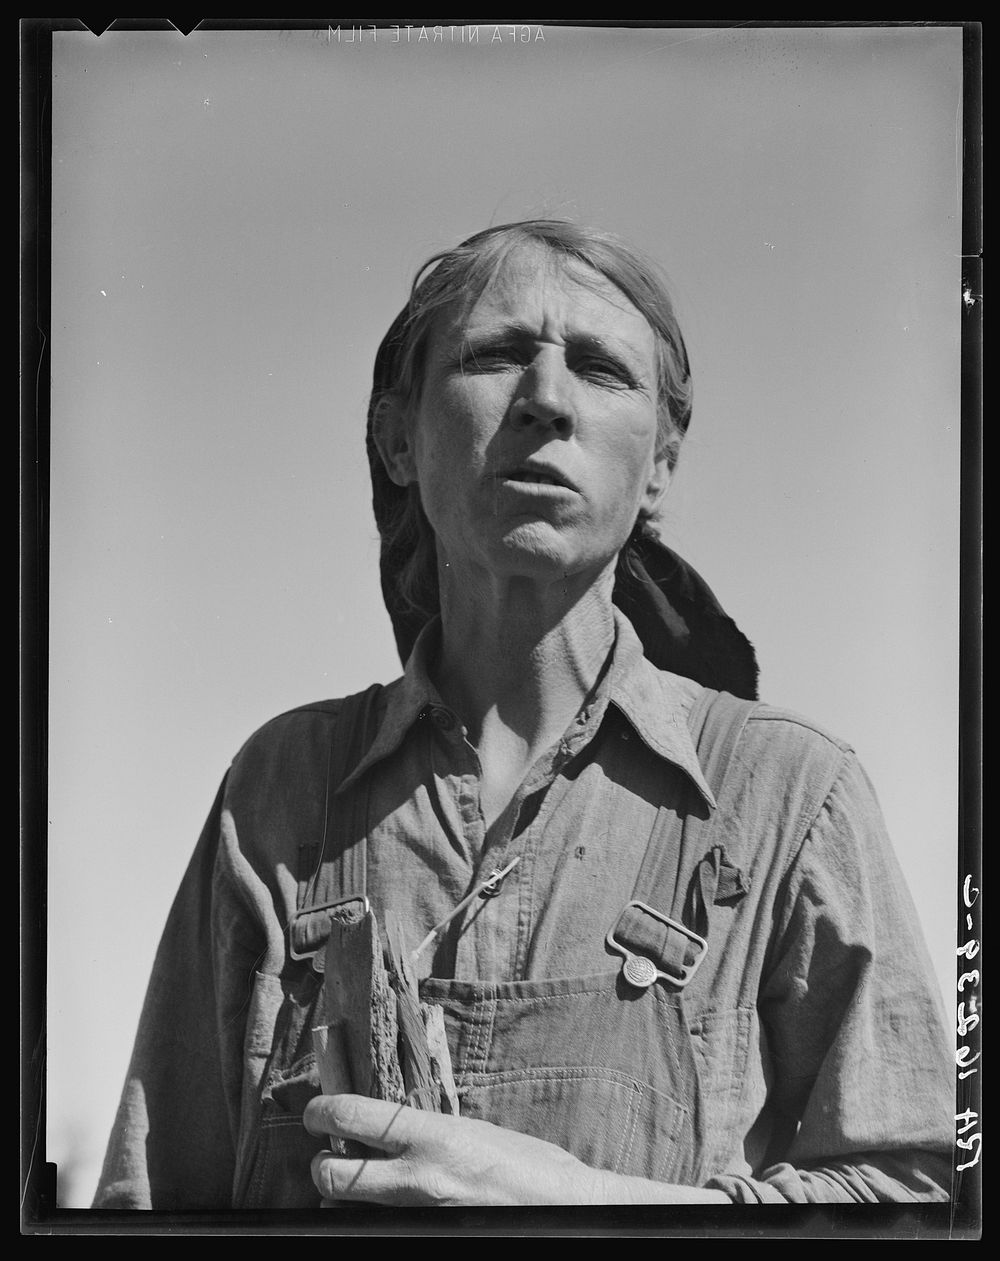 "This is a hard way to serve the Lord." Oklahoma drought refugee, California. Sourced from the Library of Congress.